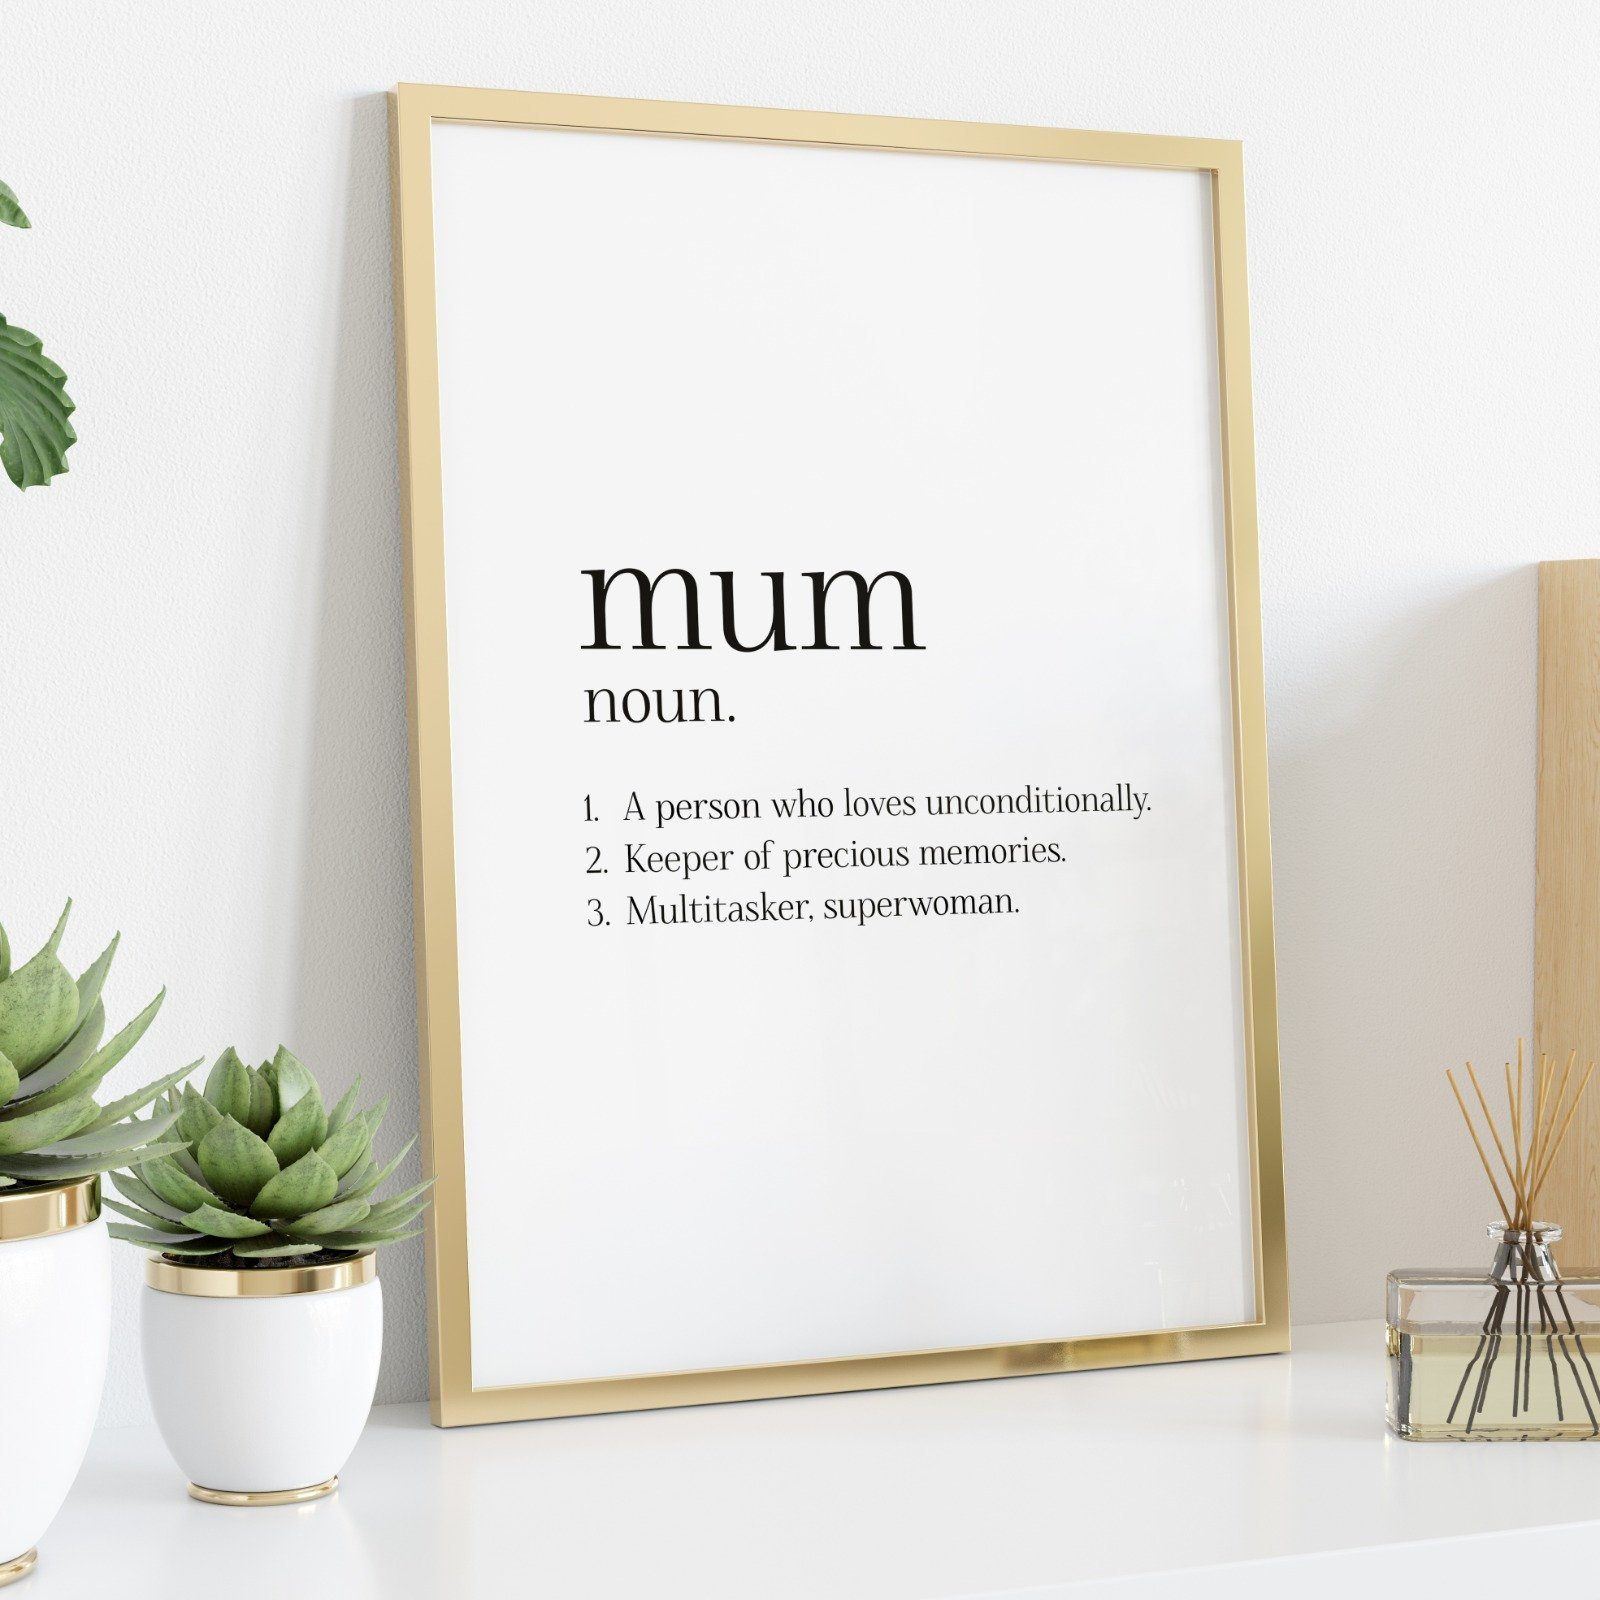 Mum Dictionary Definition poster, Mother's Day Gift, Gift for mum to be, Custom mom gift